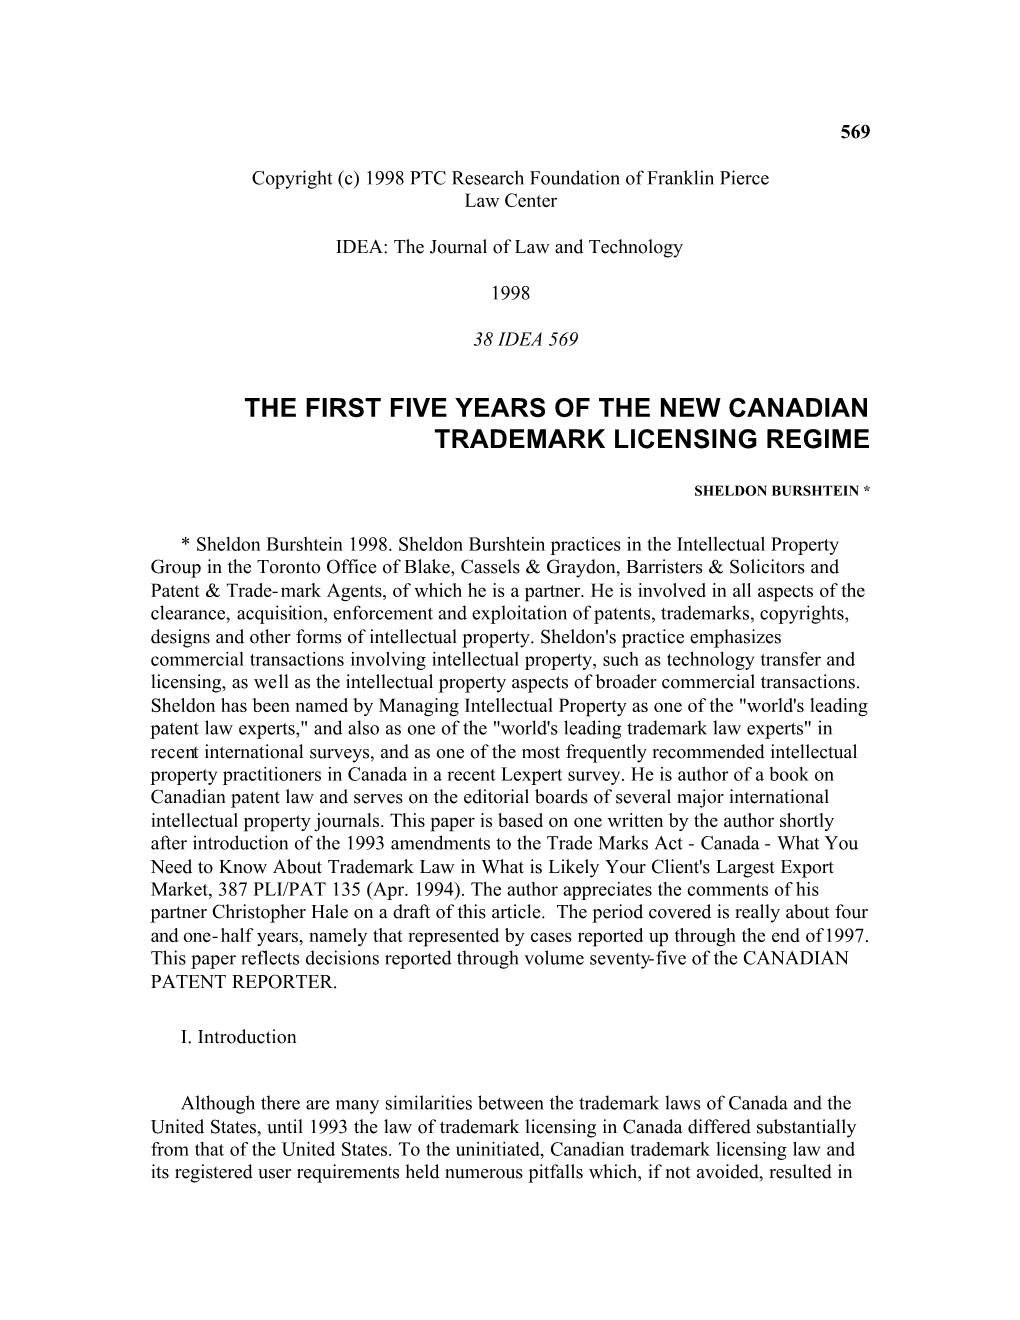 The First Five Years of the New Canadian Trademark Licensing Regime